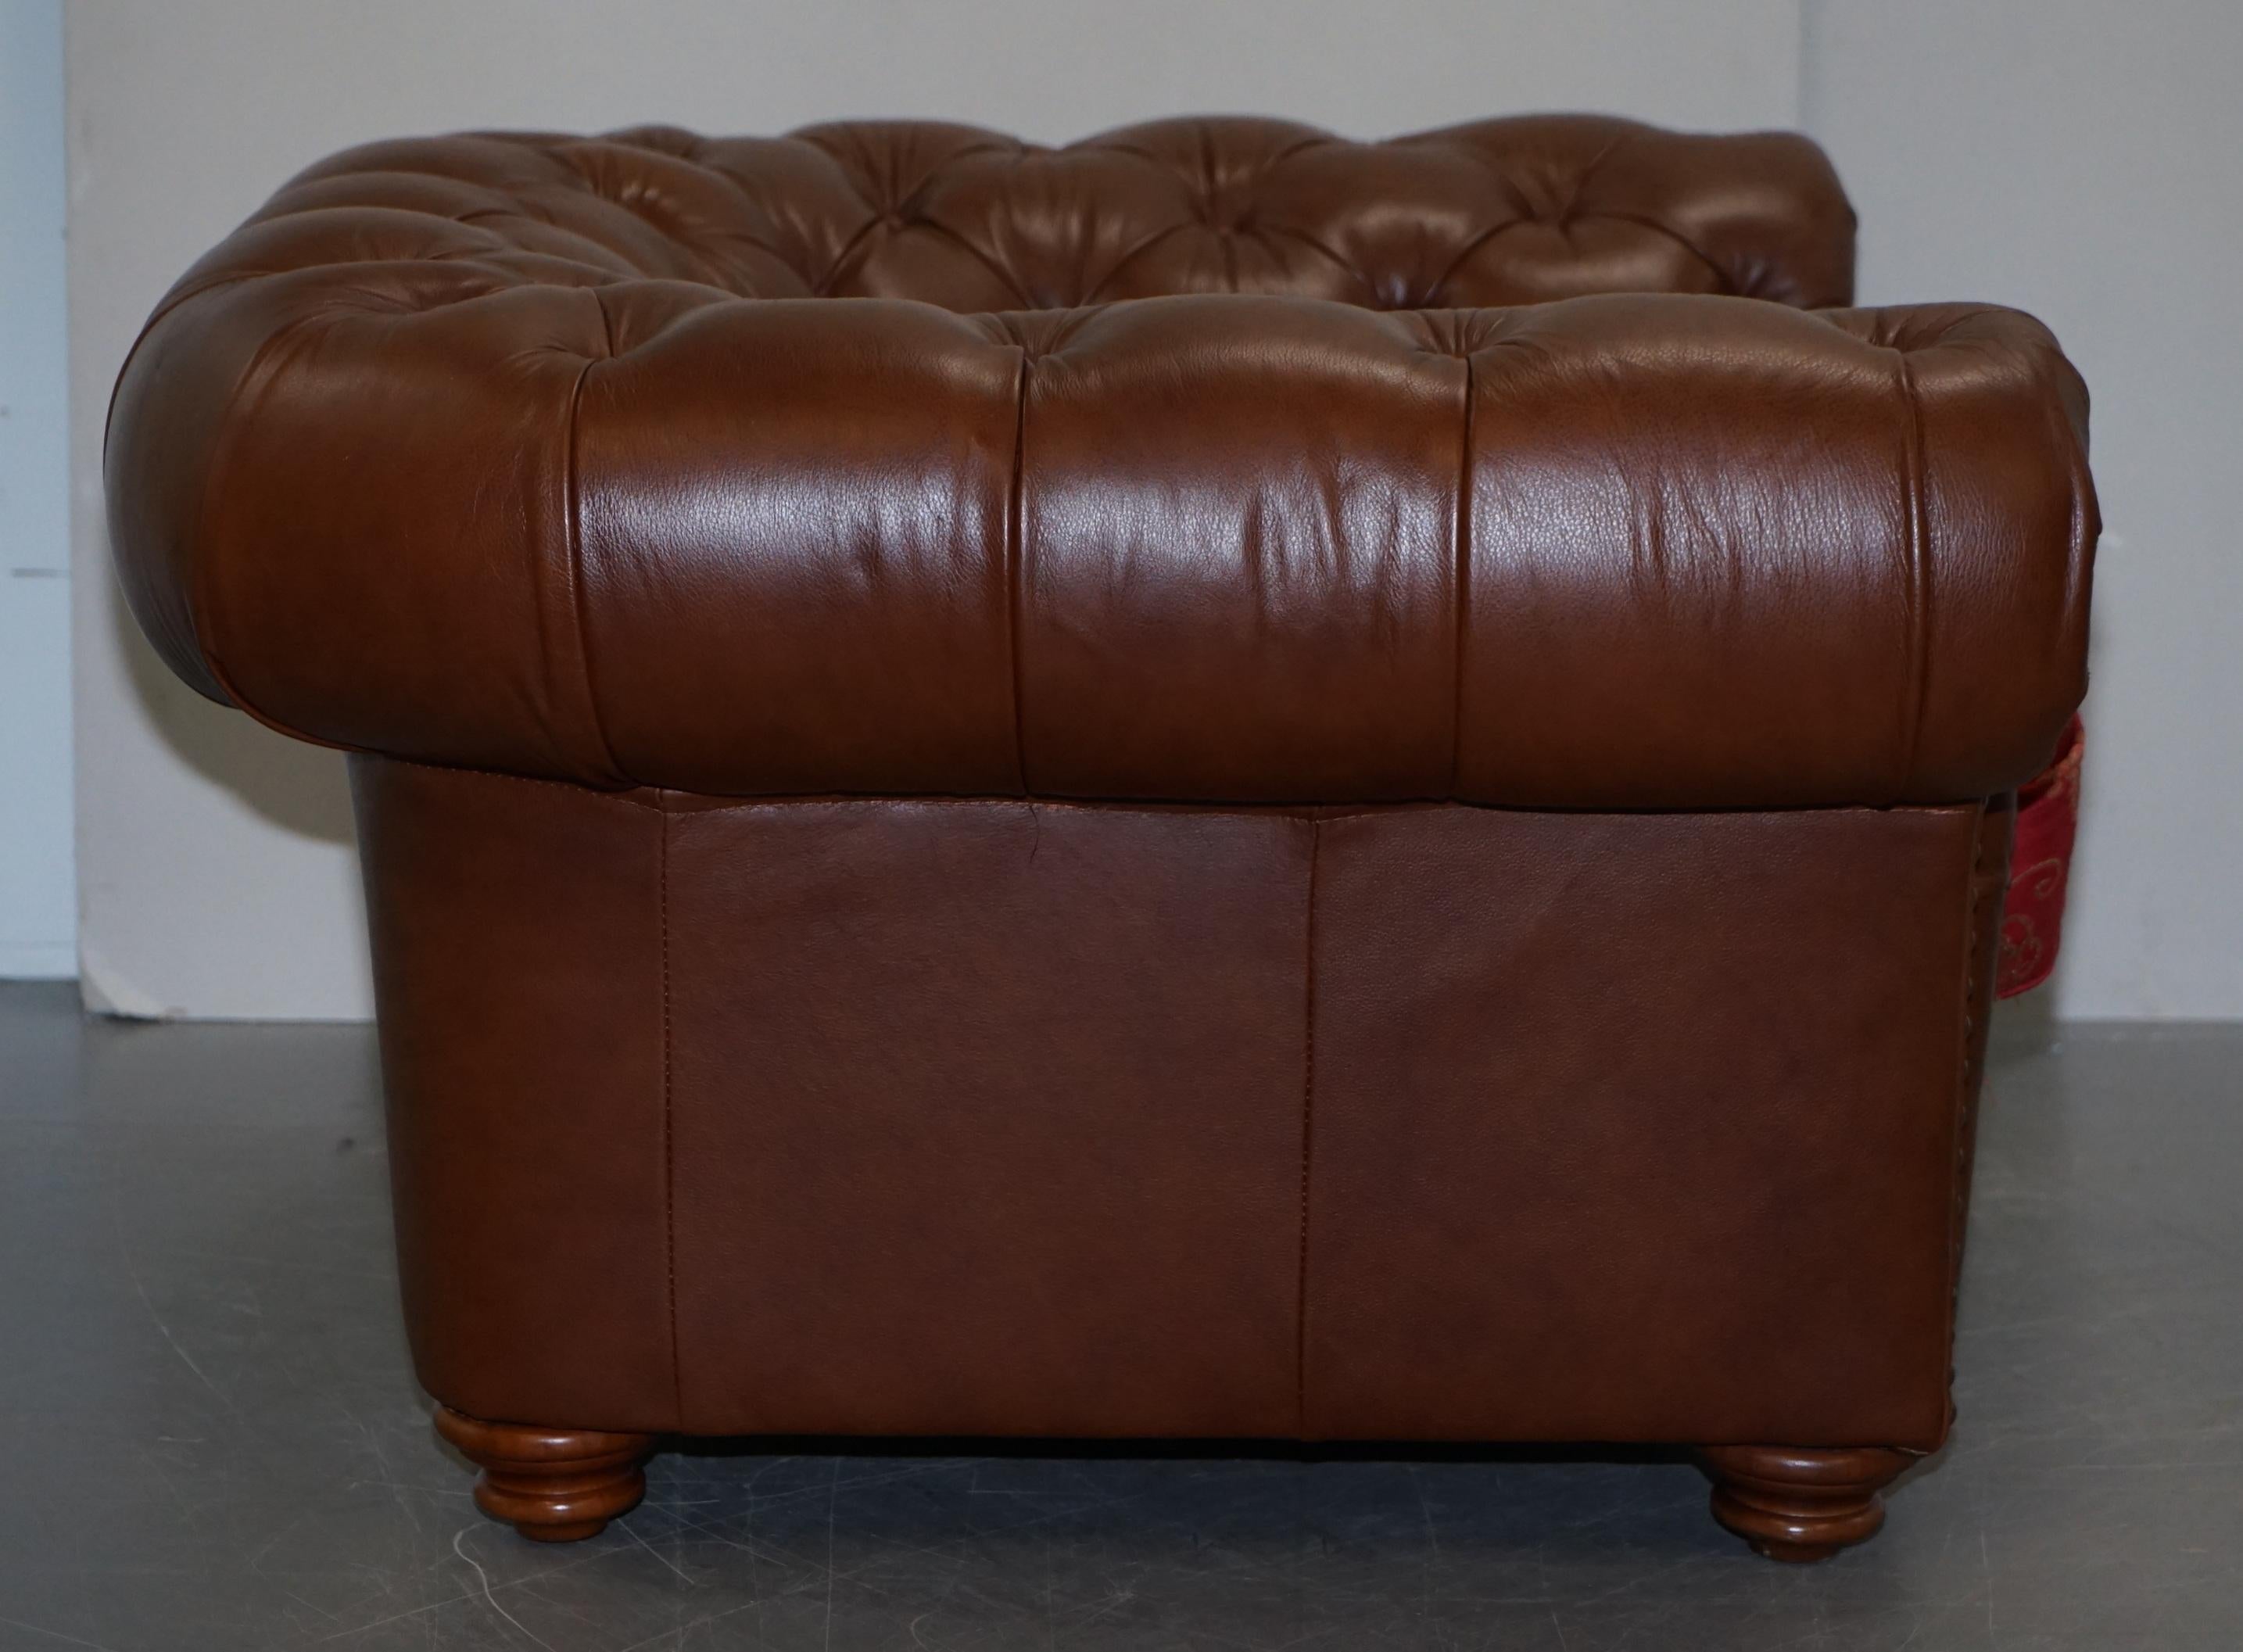 Tetrad Made in England Brown Leather Chesterfield Armchair Part of Full Suite For Sale 2